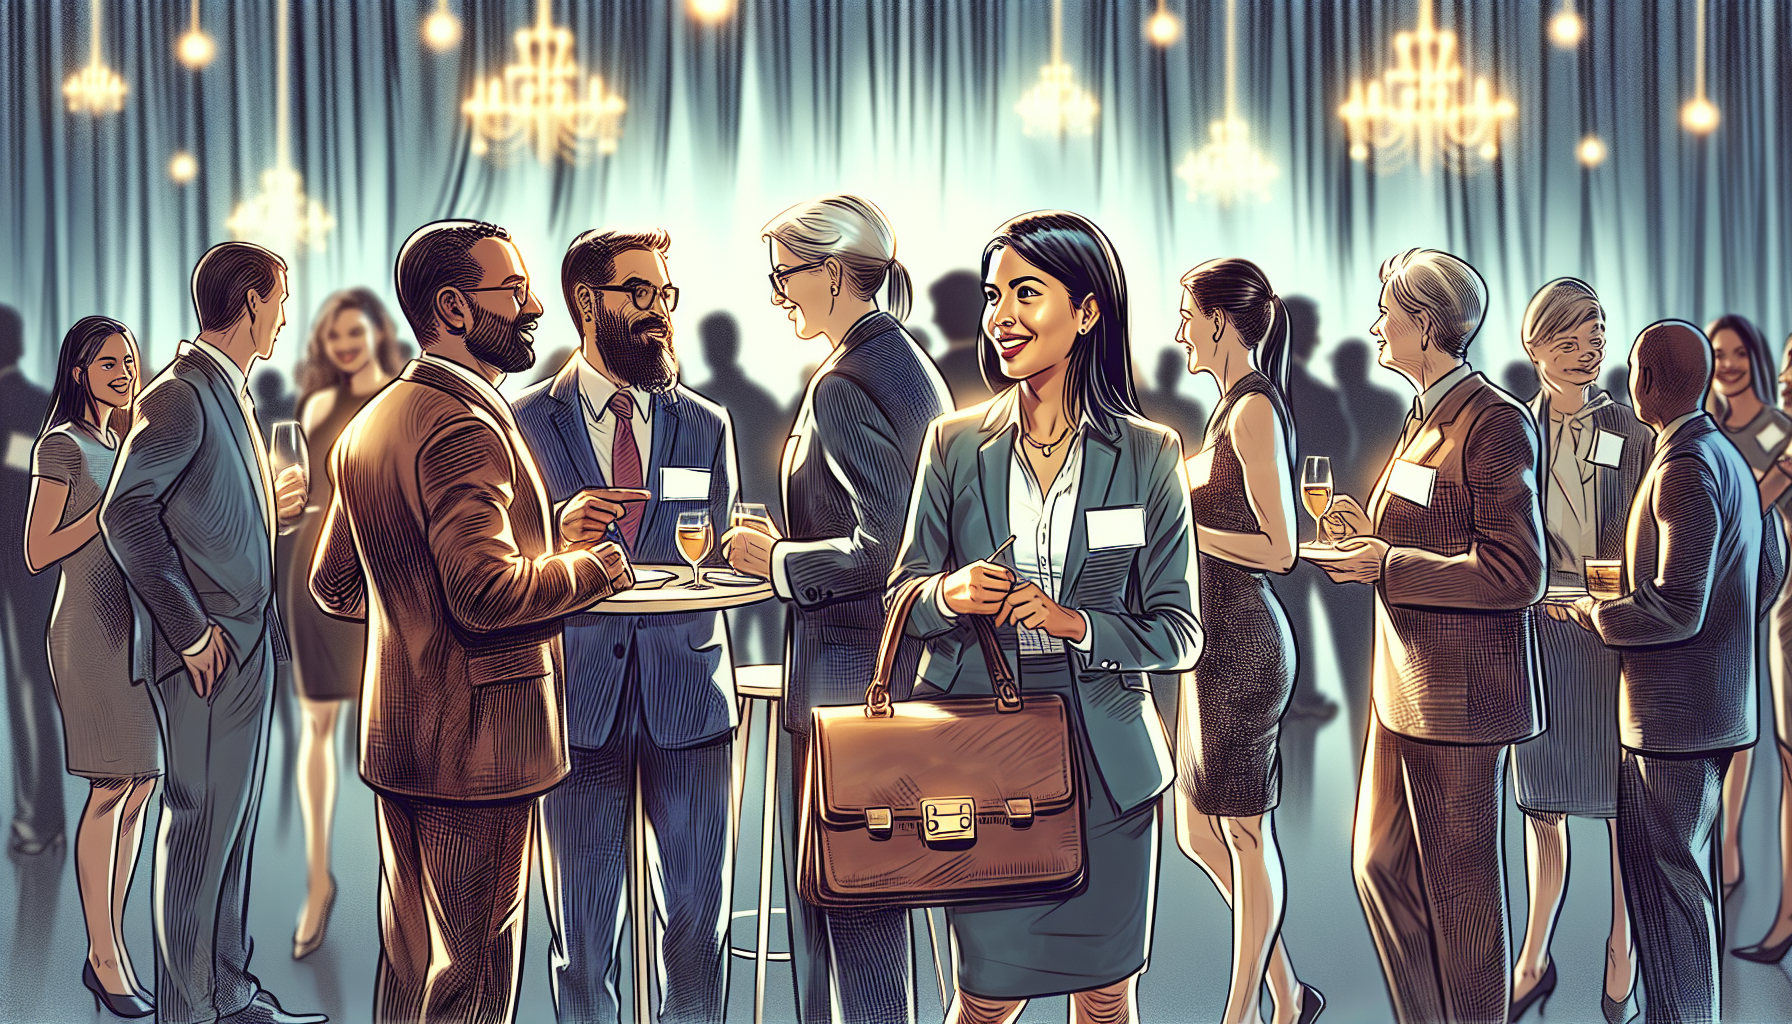 Illustration of professional networking in the entertainment industry